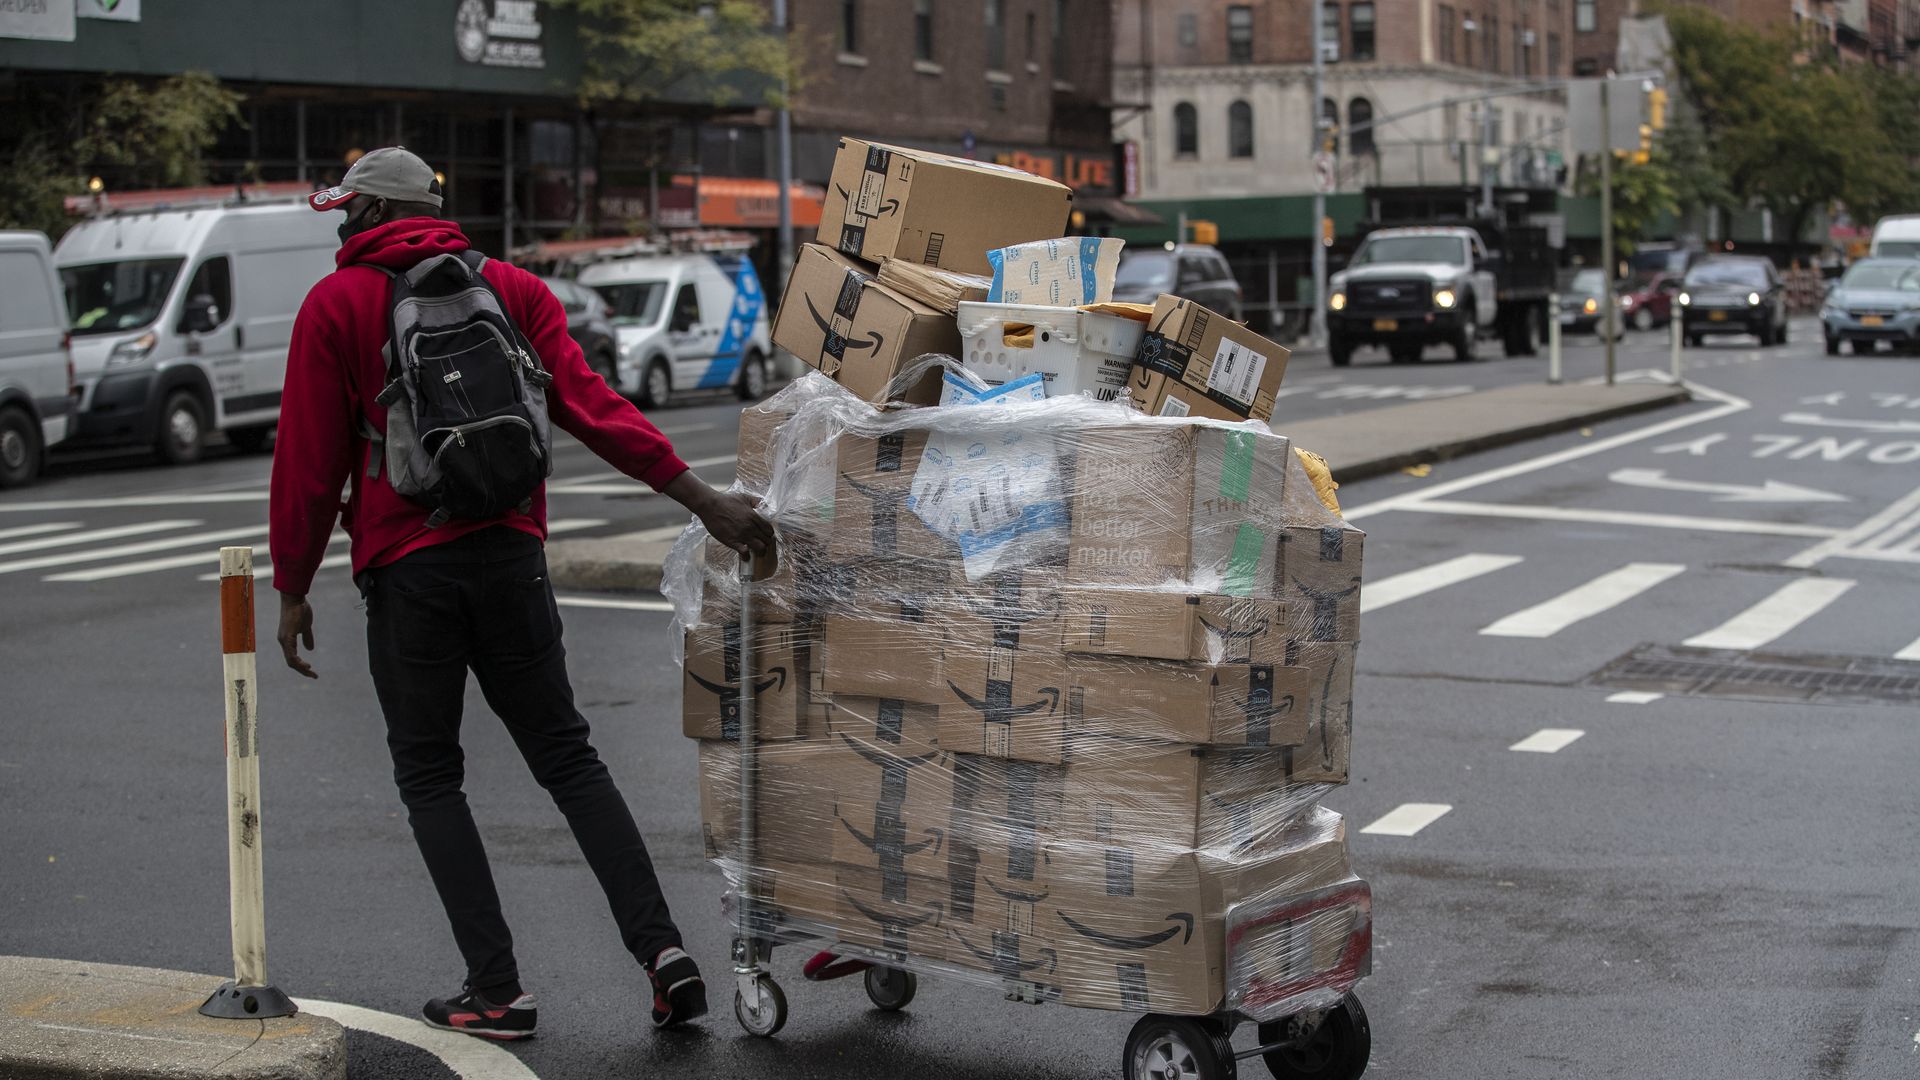 A worker wheels a cart of Amazon packages during a delivery in New York, U.S., on Tuesday, Oct. 13